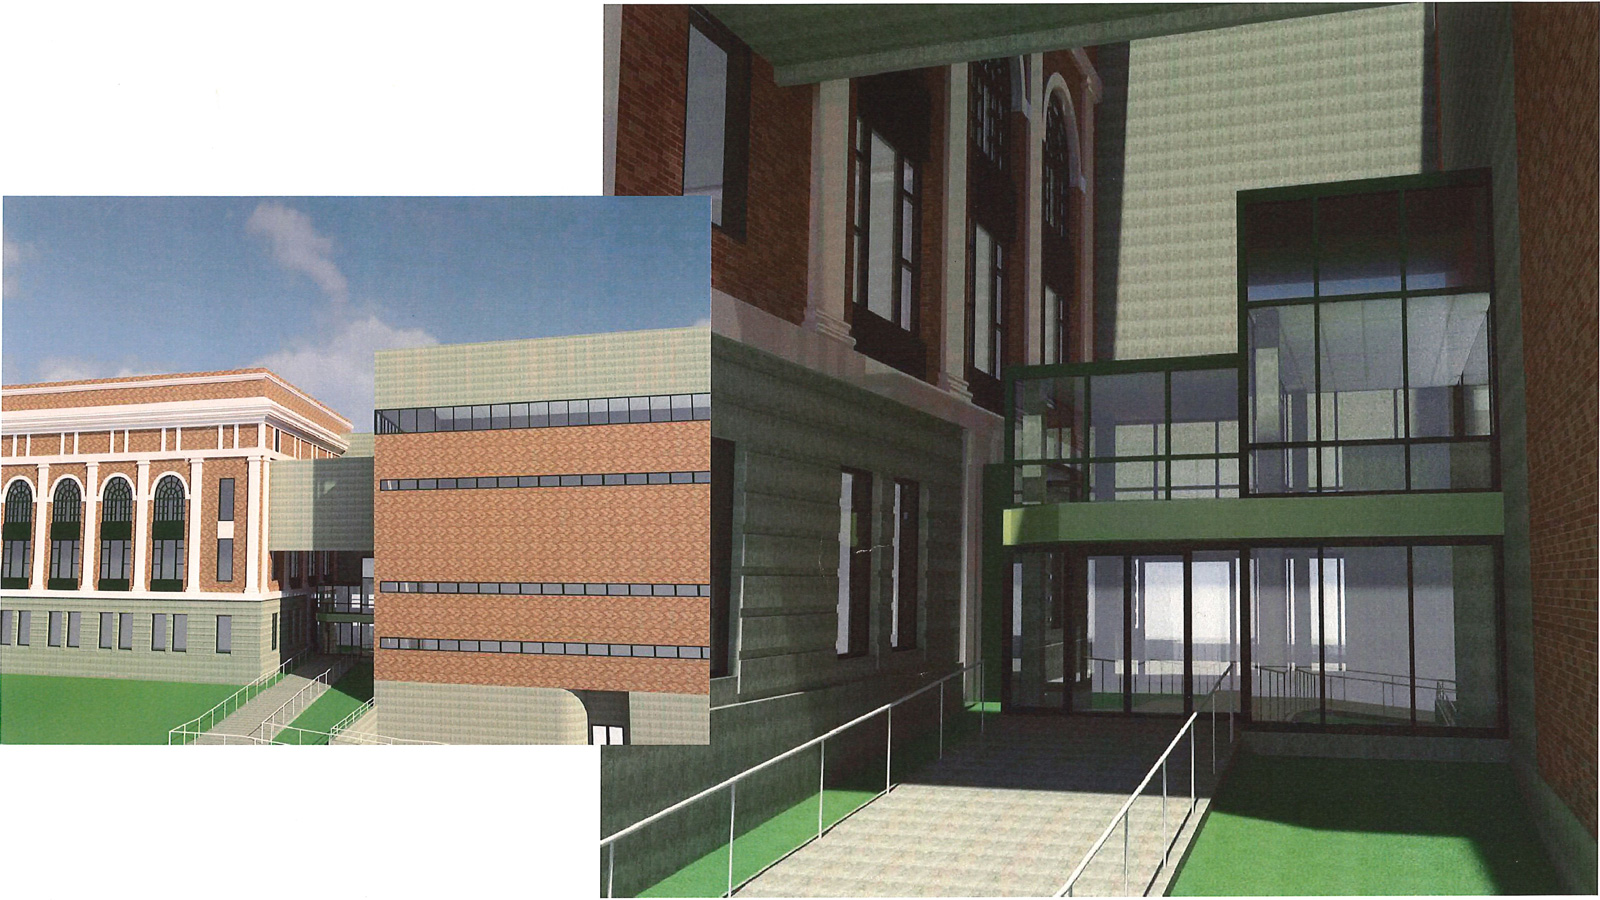 Construction to begin on new entryway into the county courthouse, law and justice center